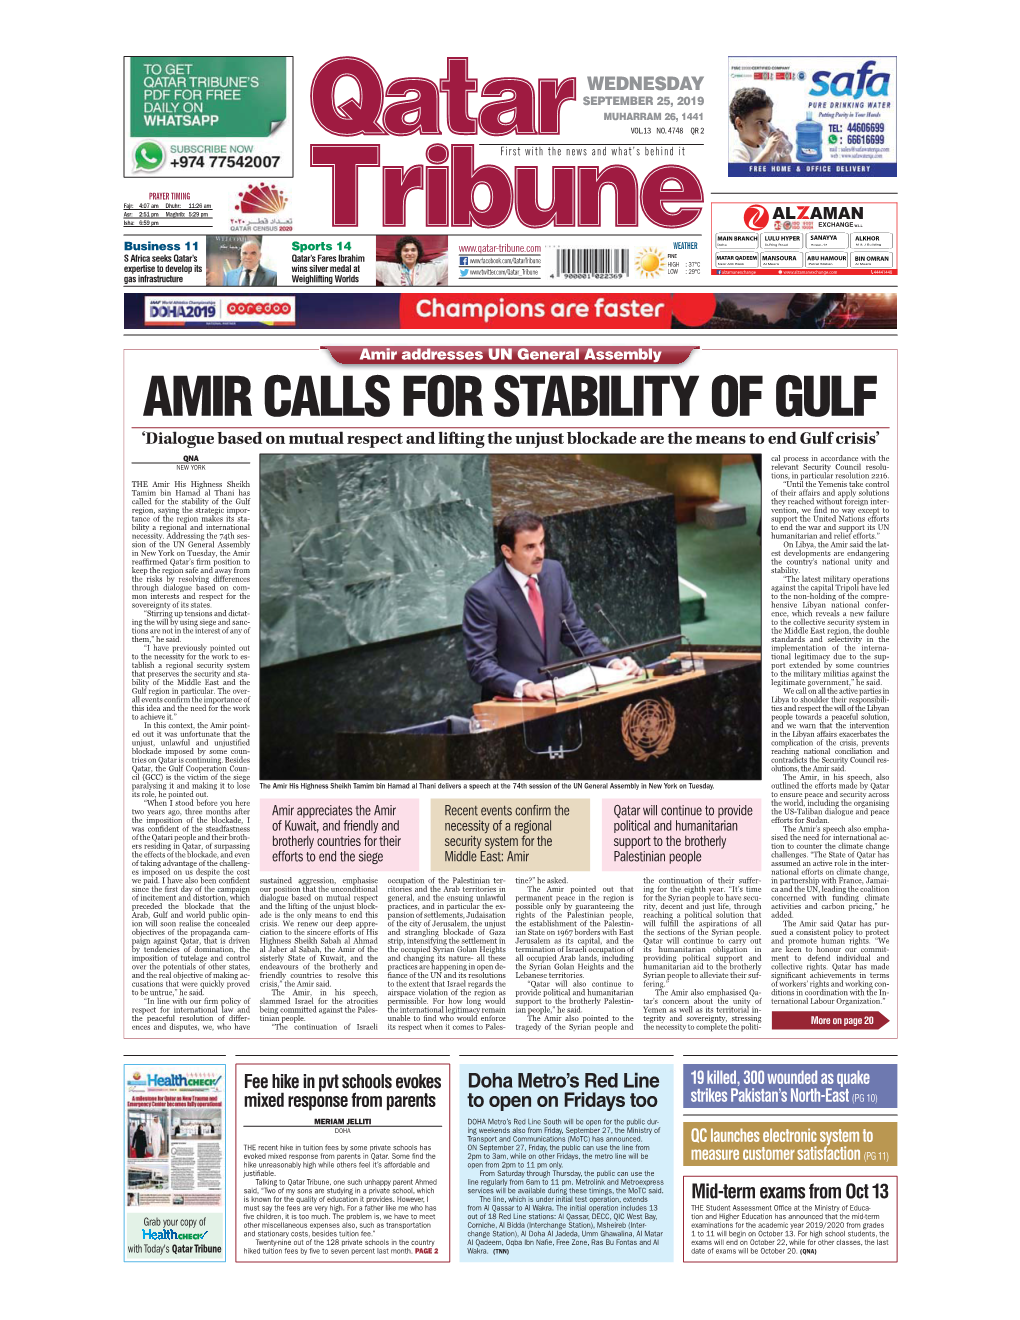 Amir Calls for Stability of Gulf